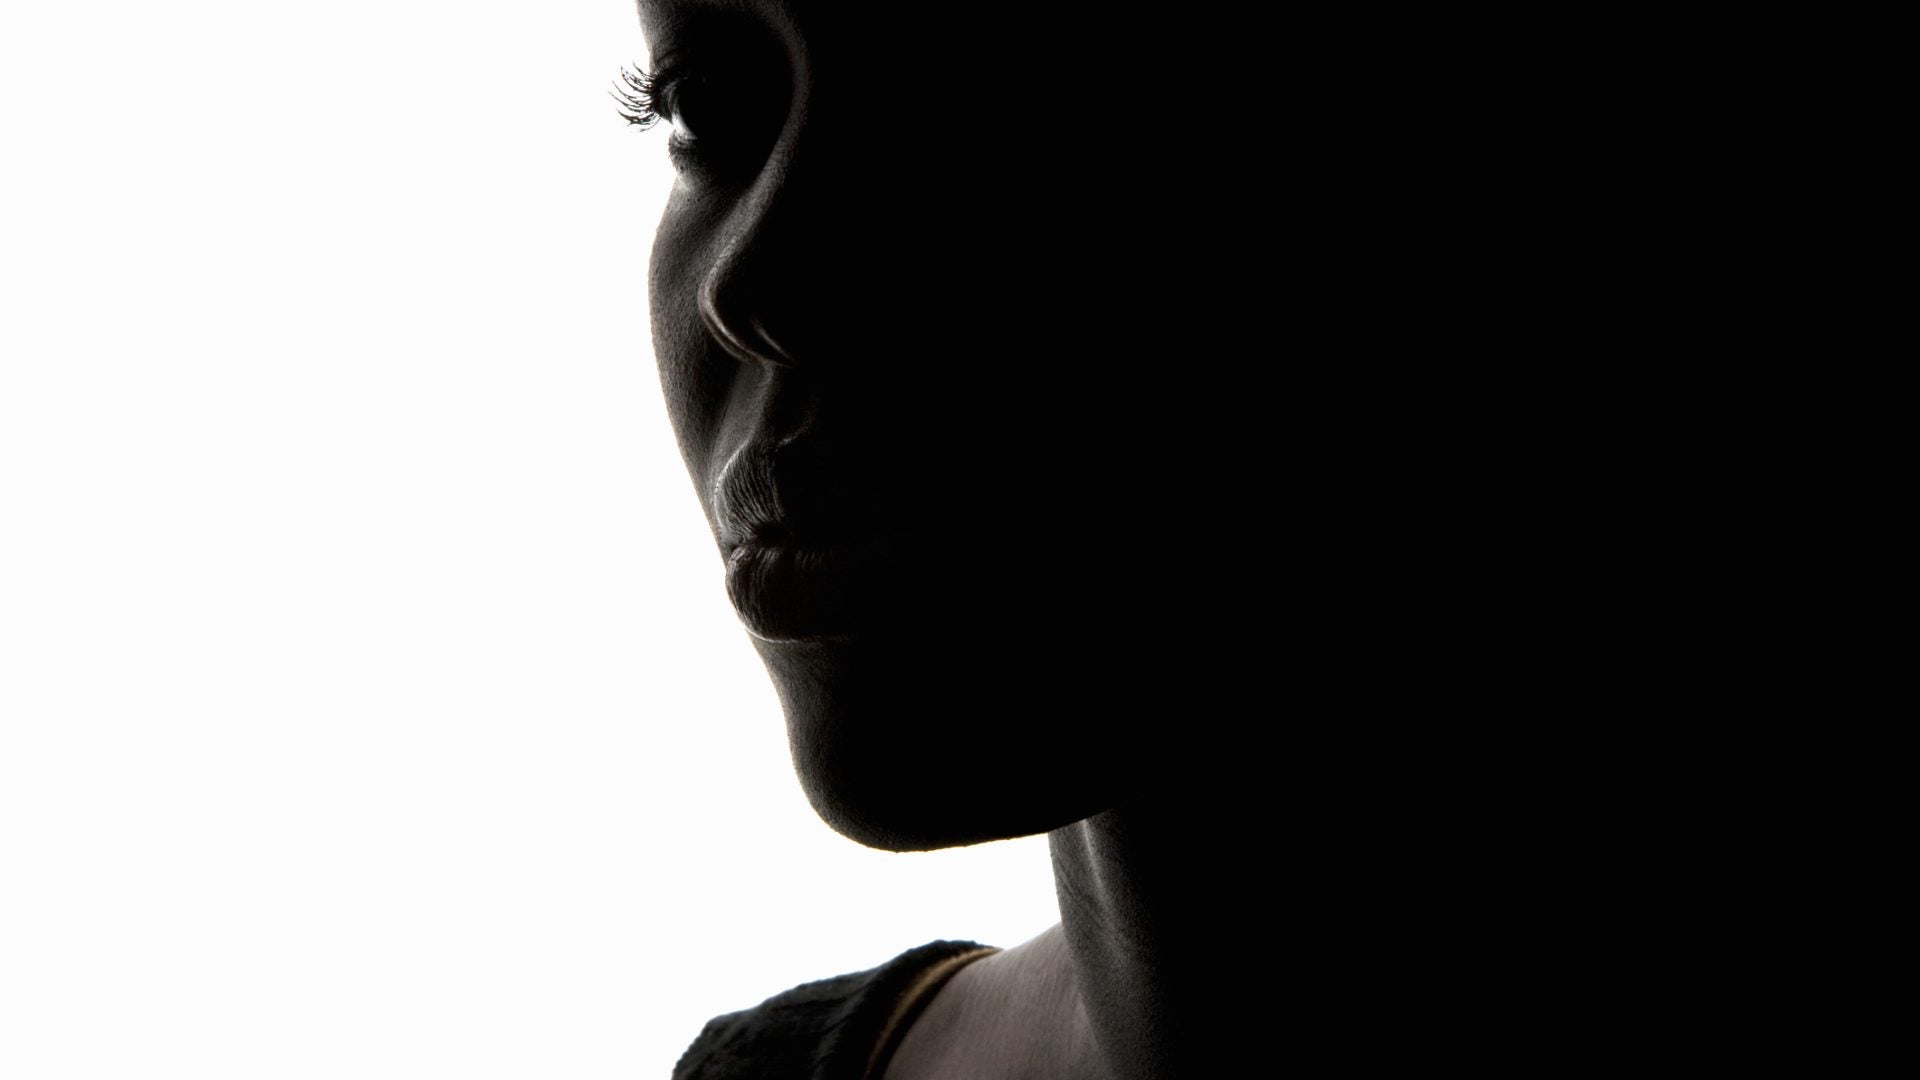 'I’m In Pain Every Day': Black Women Reveal How Lupus Impacts Their Physical And Mental Health